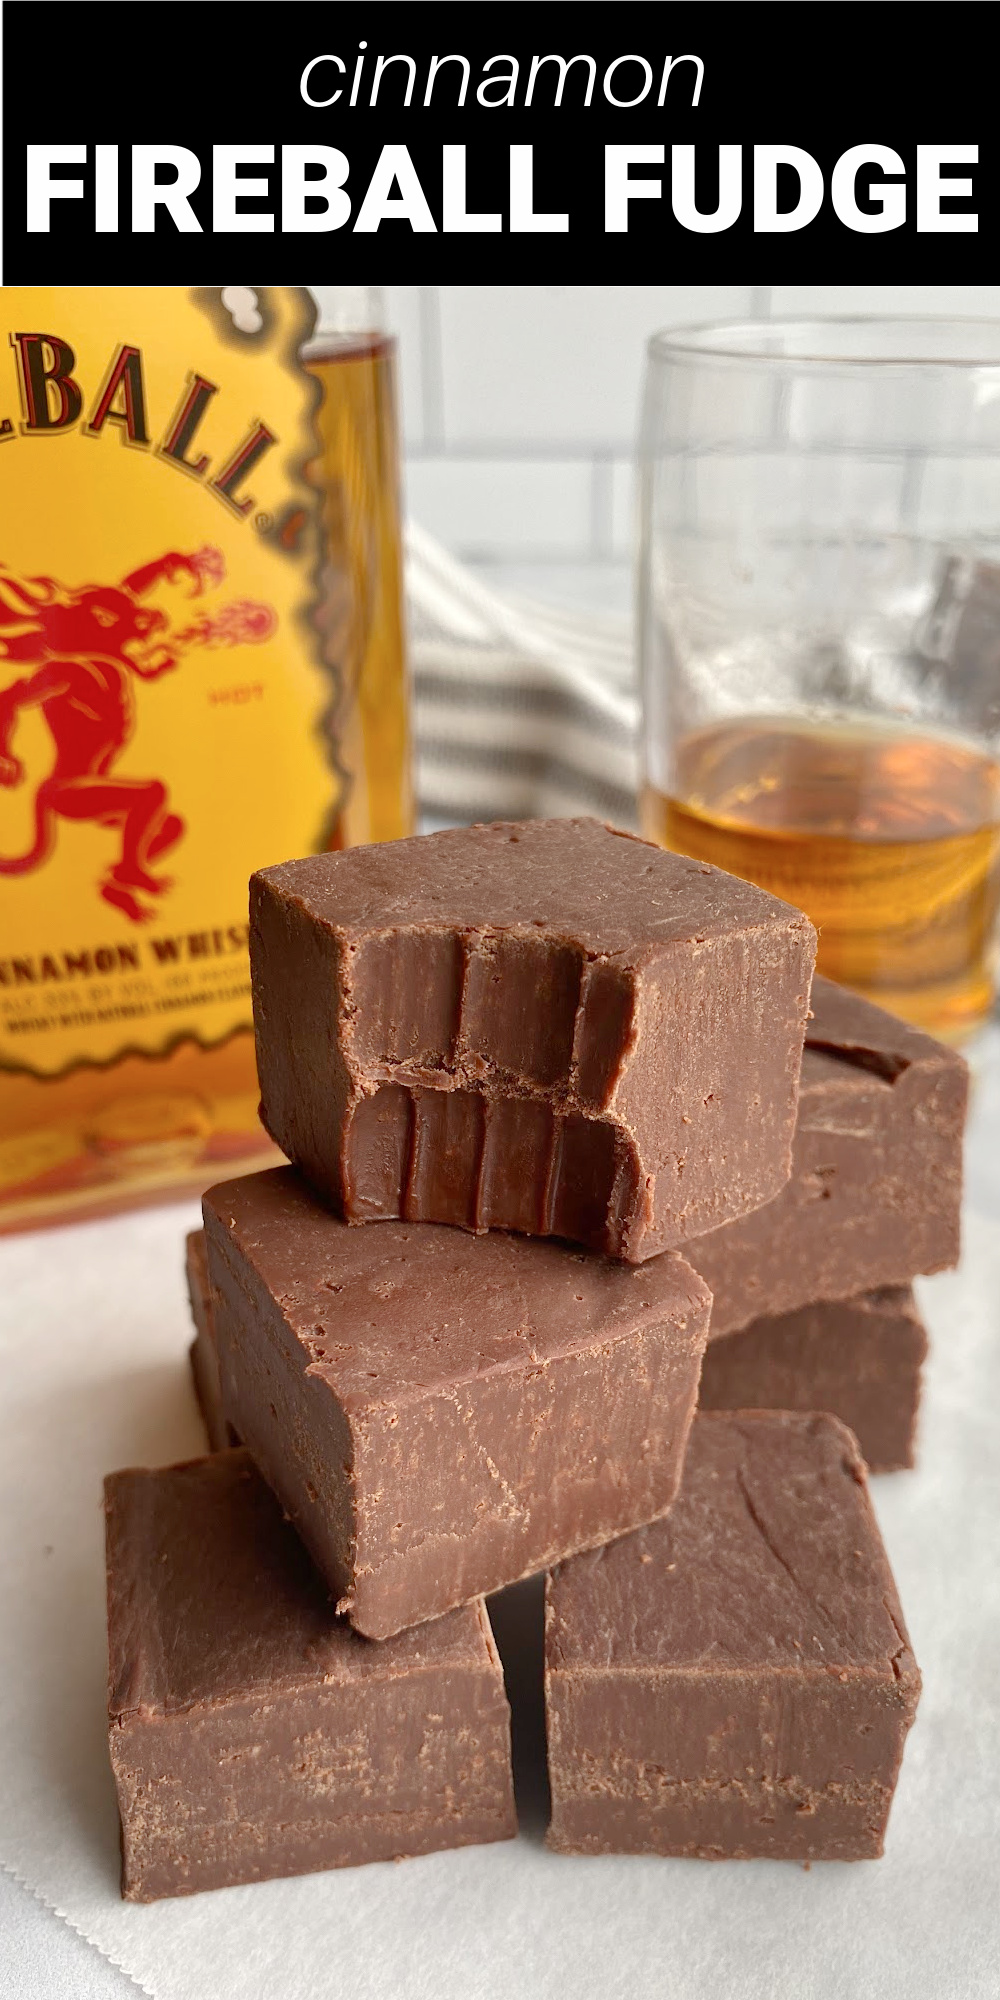 Fireball fudge is a delicious and rich chocolate fudge with a cinnamon kick. Made with cinnamon whisky, this decadent dessert is popular during the holiday season and makes great gifts.